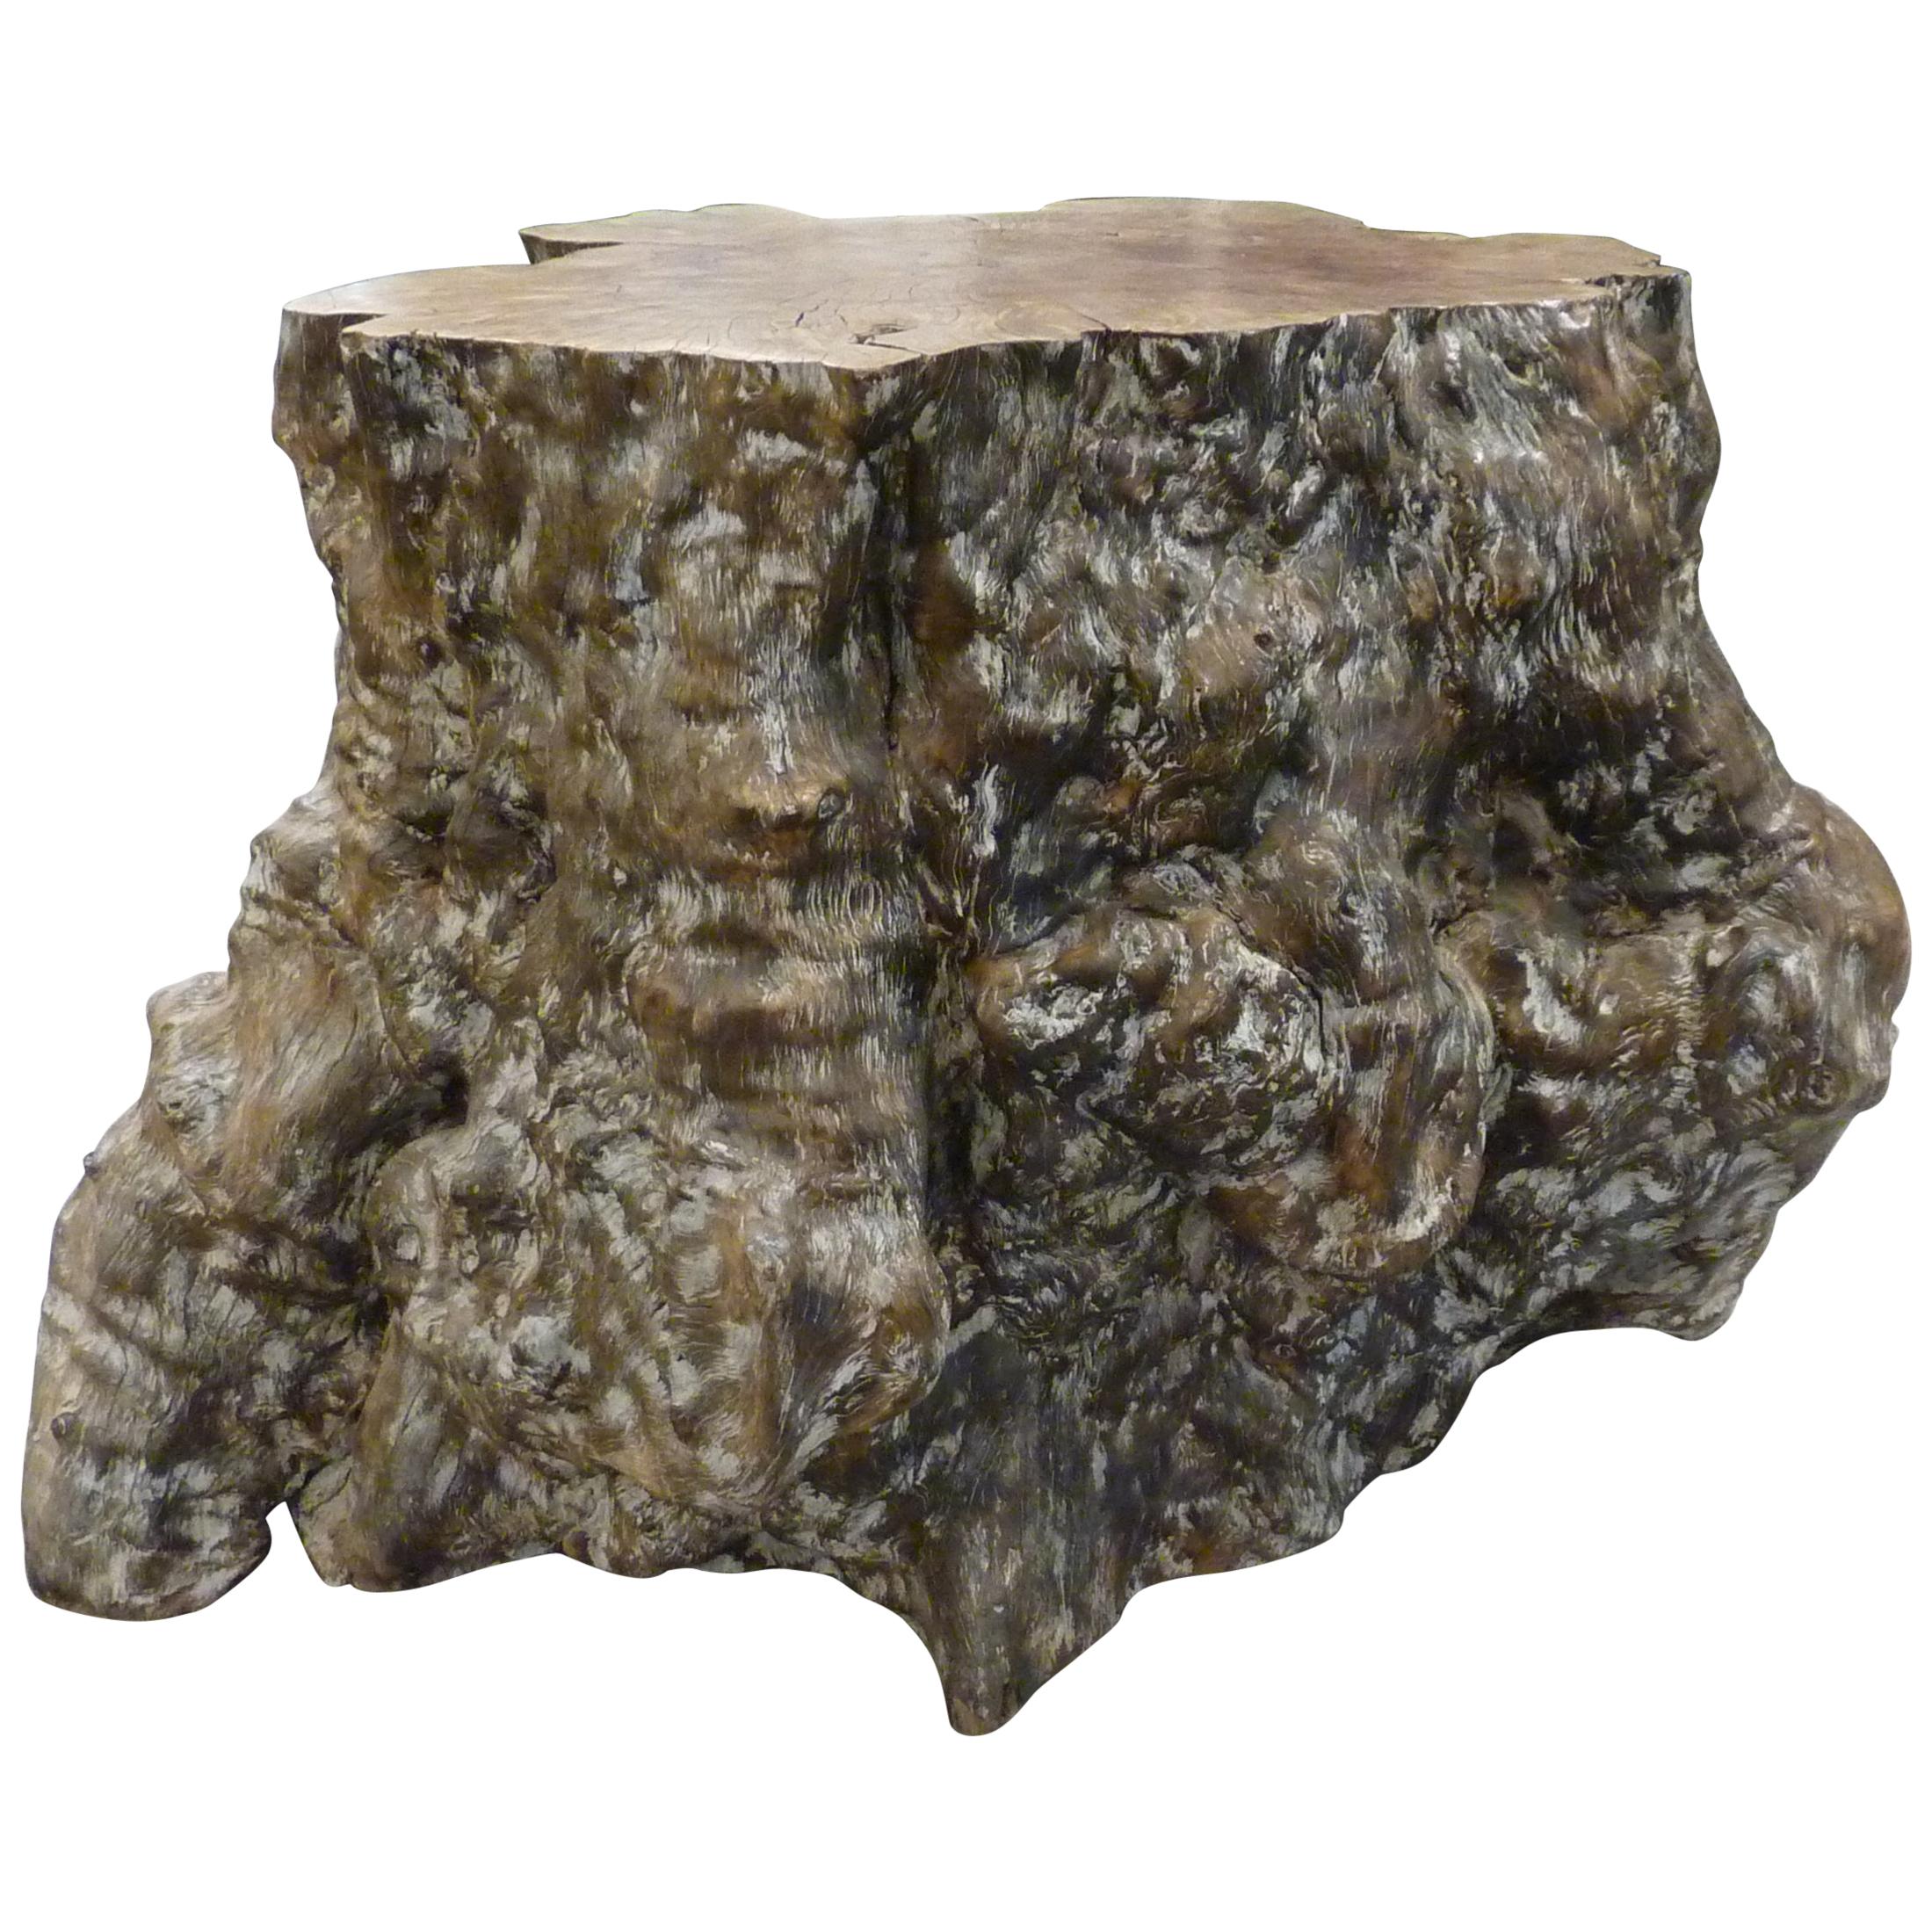 Tropical Forest Tree Trunk Table on Industrial Wheels im Angebot